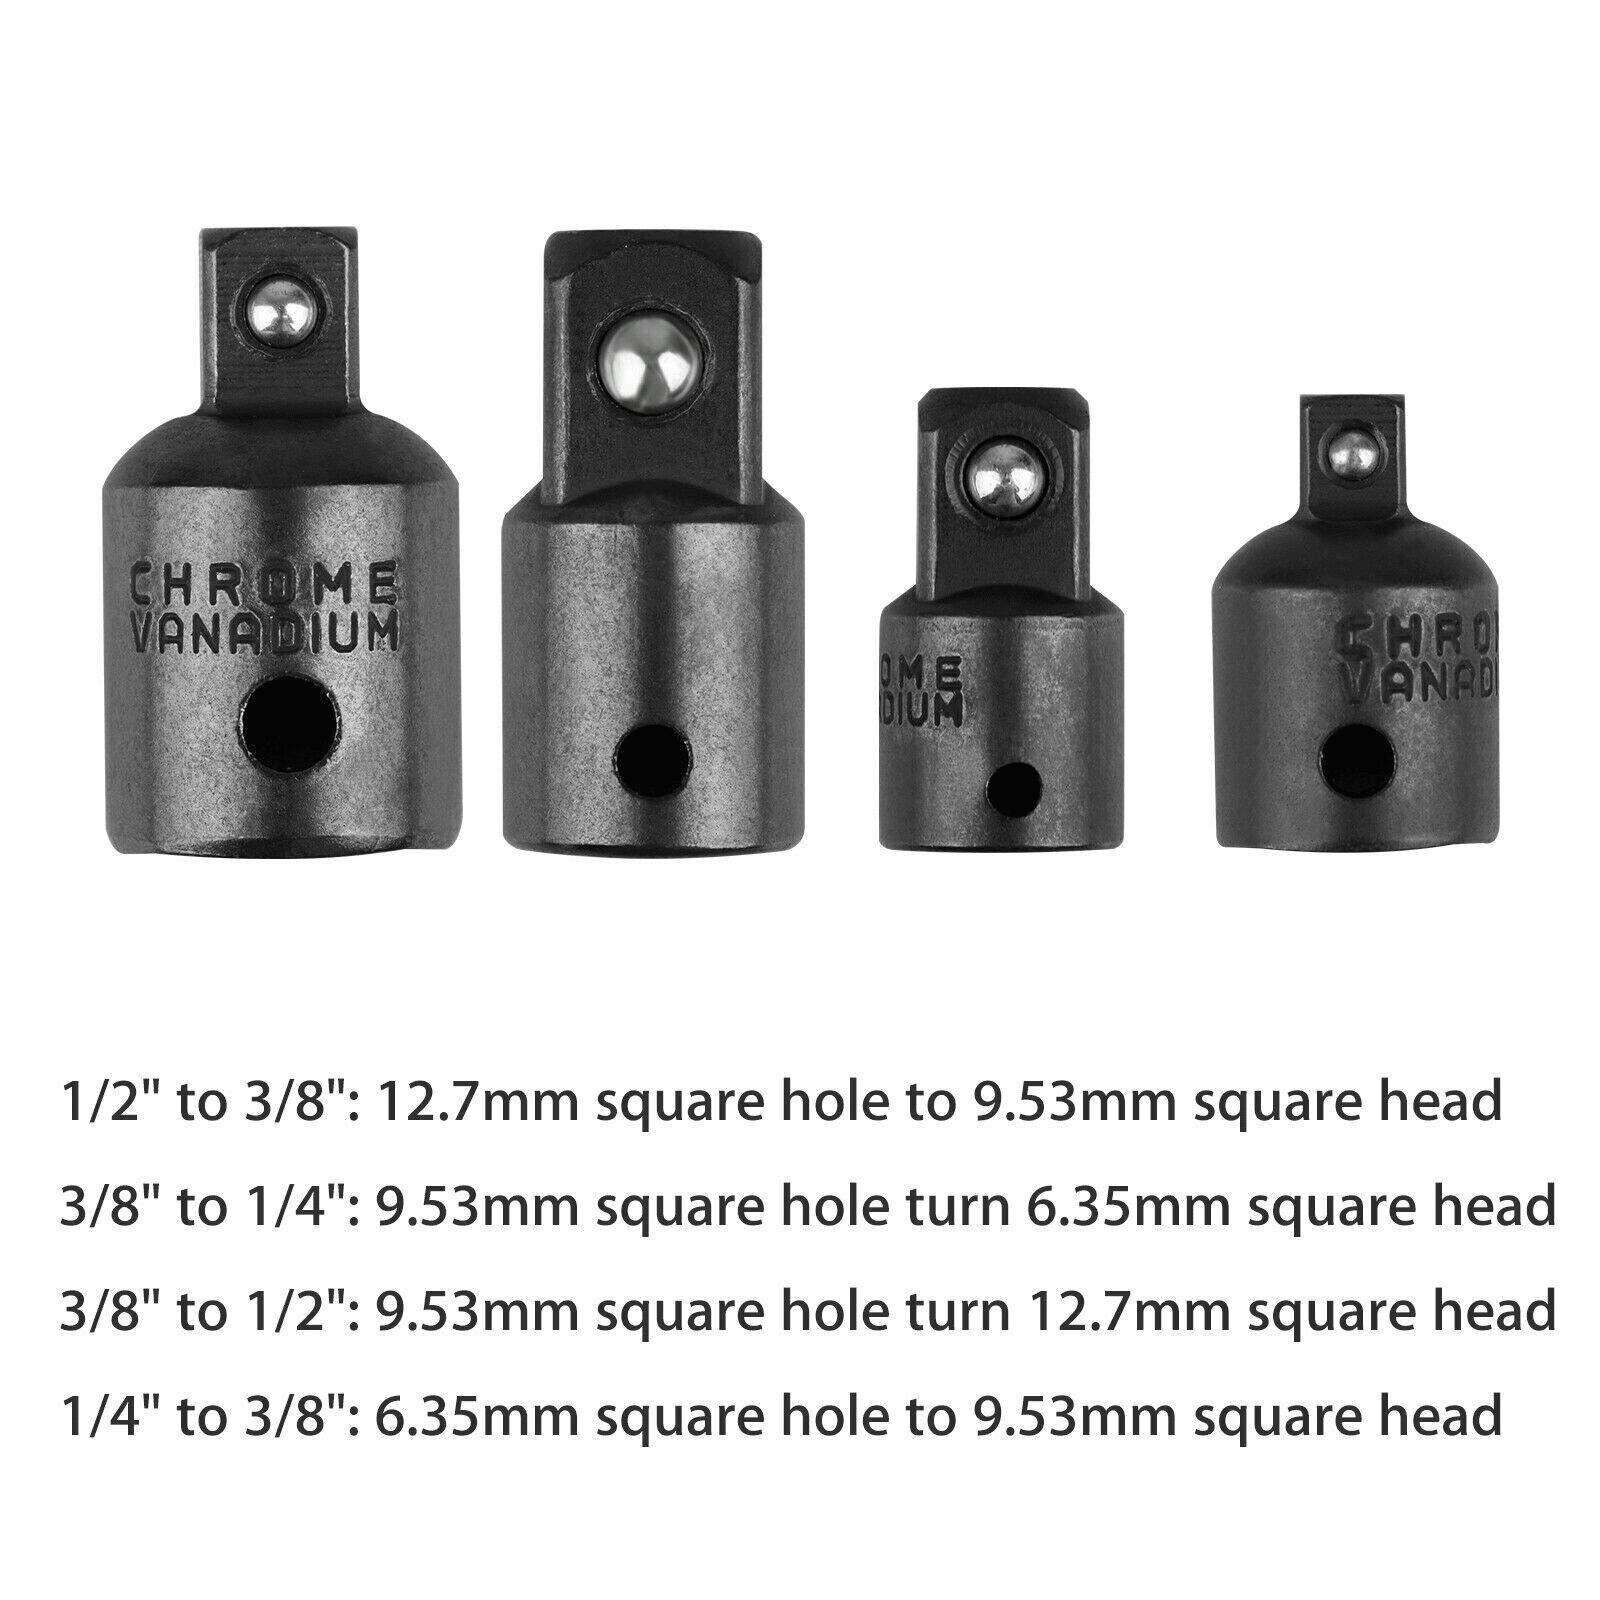 4-pack 3/8" to 1/4" 1/2 inch Drive Ratchet SOCKET ADAPTER REDUCER Air Impact Set Geartronics Does Not Apply - фотография #3